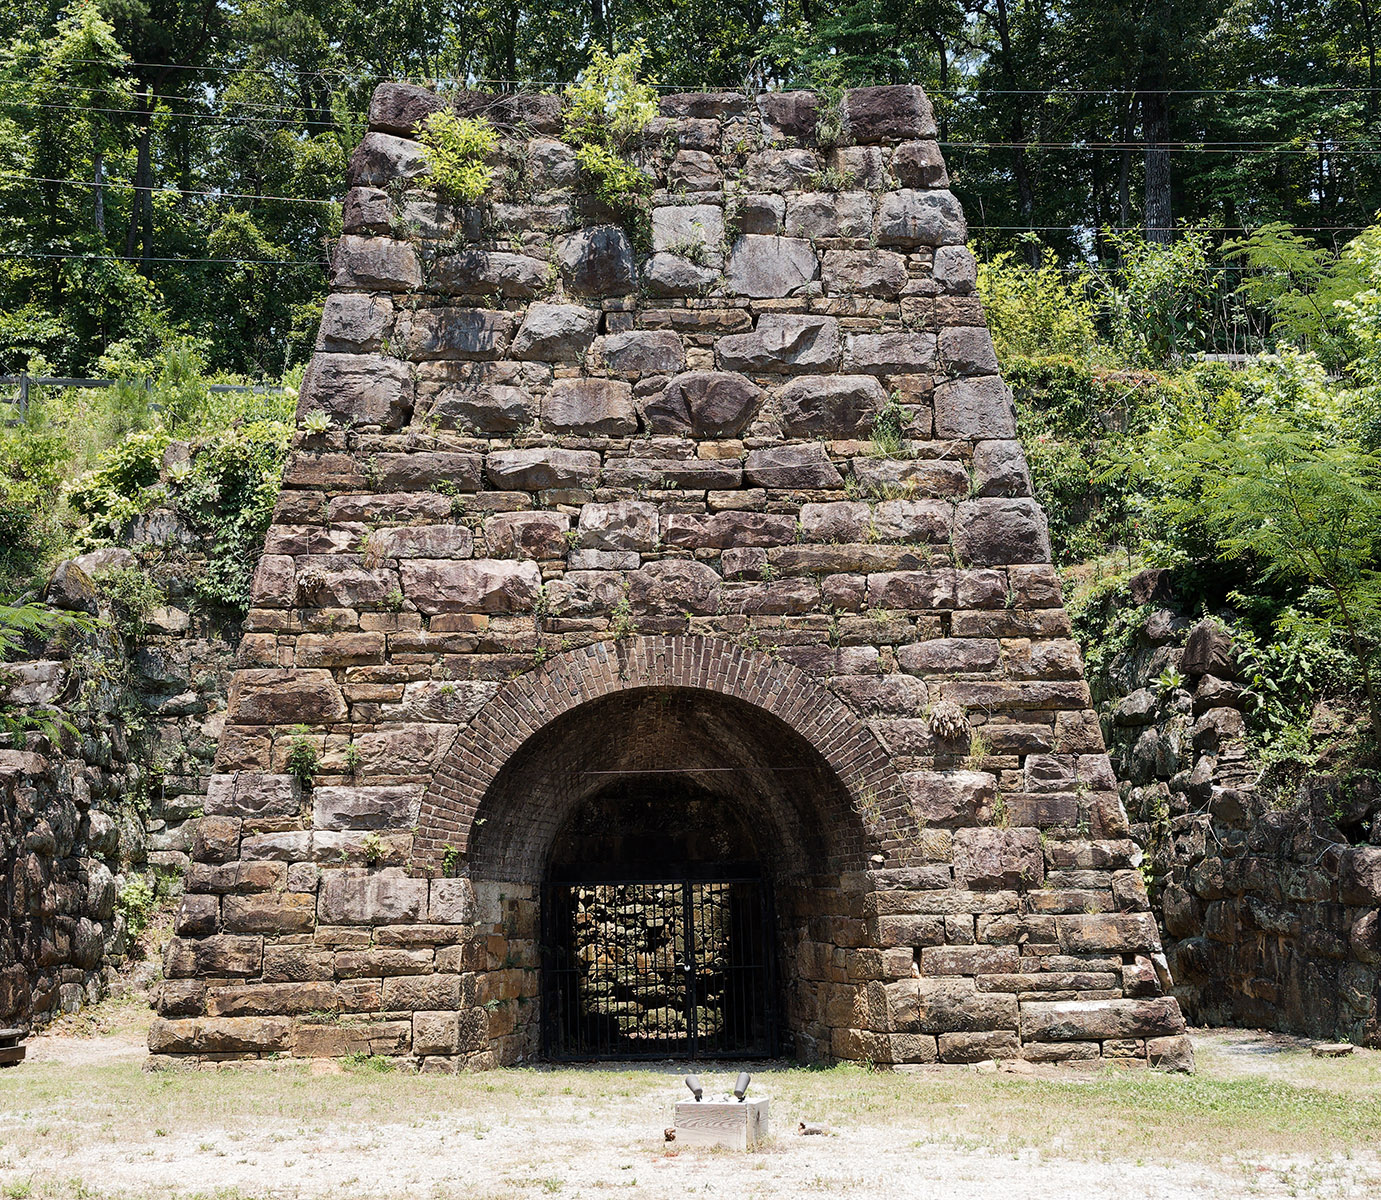 Janney Furnace in Ohatchee AL.  This is the remnant of furnace works built to produce pig iron during the Civil War.  The Confederacy was desperately short of pig iron and steel for military purposes, and the location was chosen due to the abundance of iron-containing ore (hematite), limestone and coal in the area.  On July 14, 1864, a Union cavalry raiding force attacked the furnace works having learned of the works during a general movement to destroy railroads between Montgomery AL and West Point GA.  The buildings and chimney of the furnace were destroyed after a much smaller Confederate cavalry force engaged Union cavalry at the Battle of “Ten Islands” on the Coosa River ¼ mile above the current site of the Neely Henry Dam.